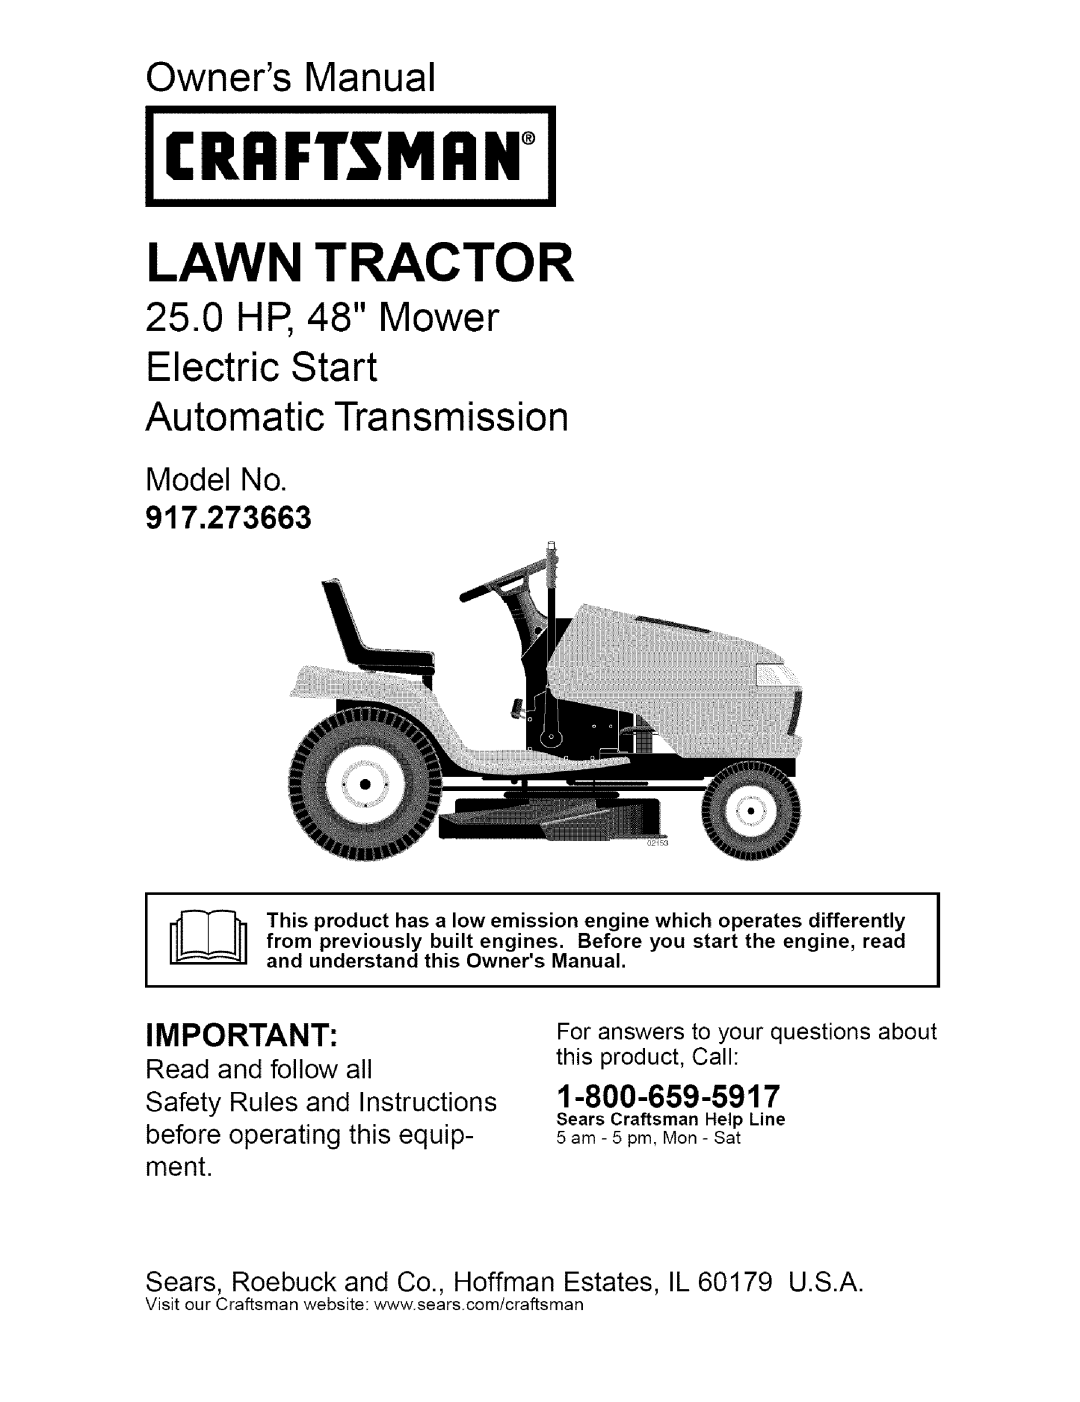 Craftsman 917.273663 owner manual Crrft.Tmrn, Lawn Tractor, Owners Manual, Model No, 1-800-659-5917 